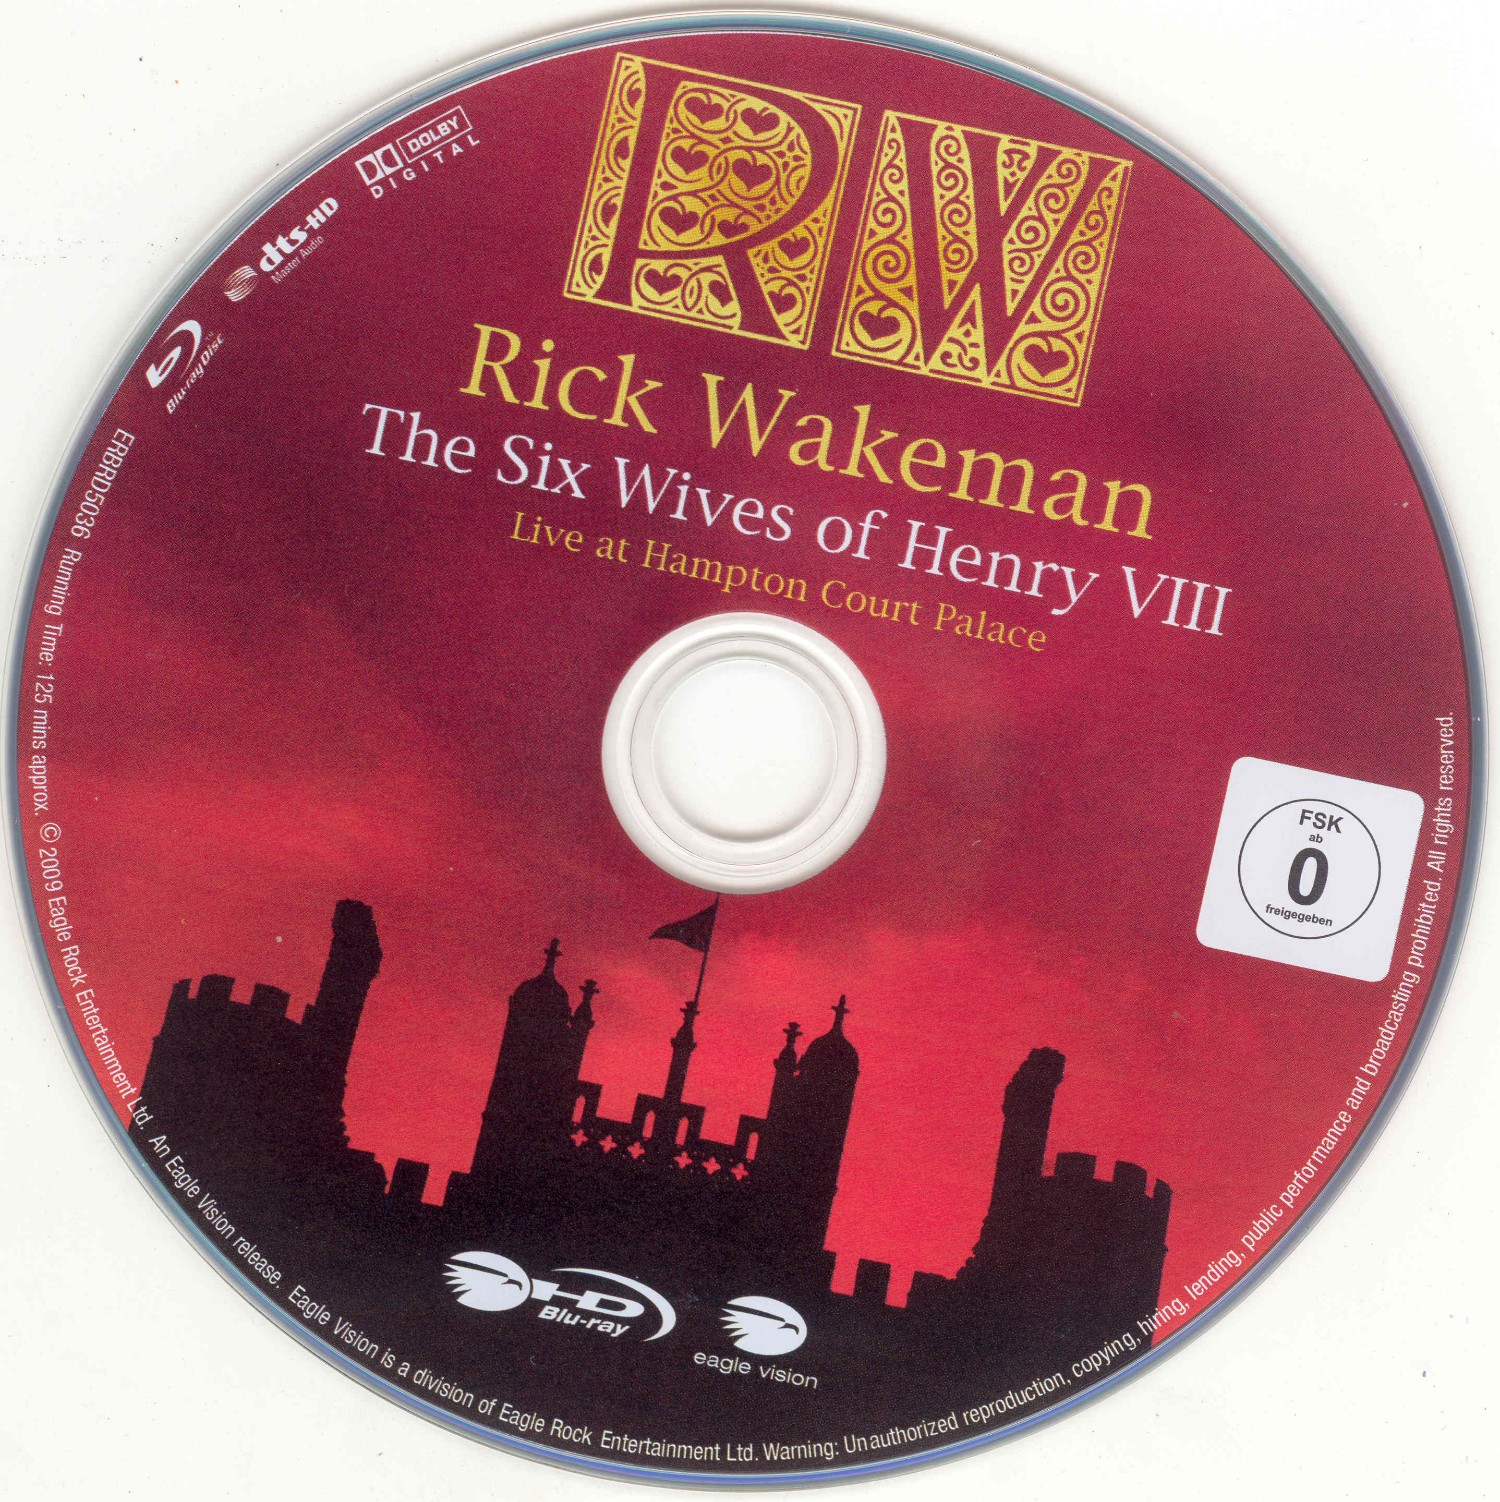 Rick Wakeman: The Six Wives of Henry VIII. Live at Hampton Court Palace [2009 г.